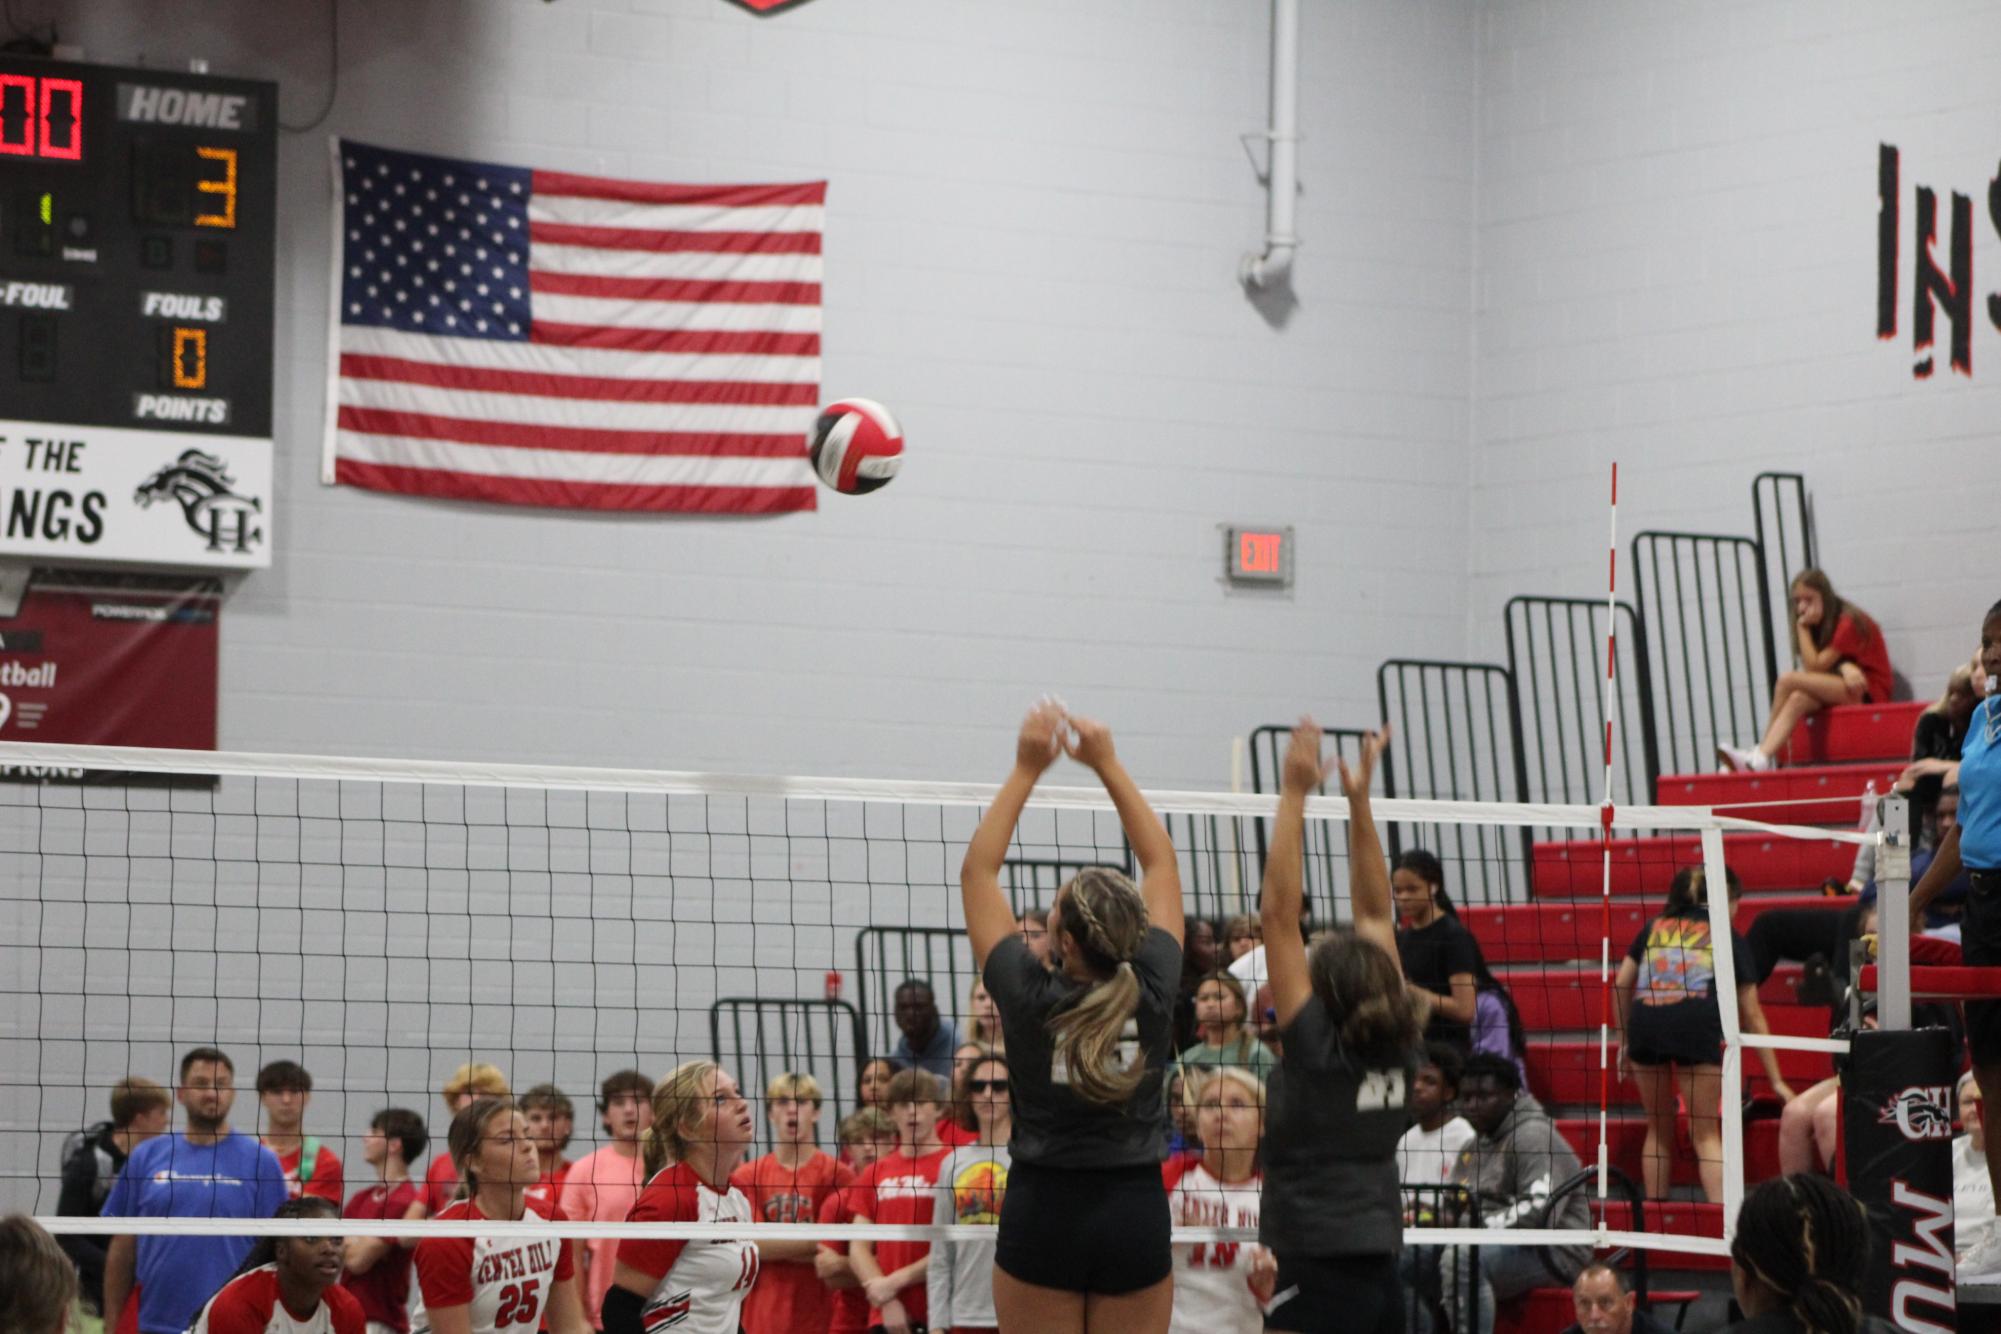 The+CHHS+Volleyball+team+had+their+second+loss+of+the+23-24+season+last+Thursday%2C+August+10th%2C+when+they+competed+against+Lafayette+High+School.